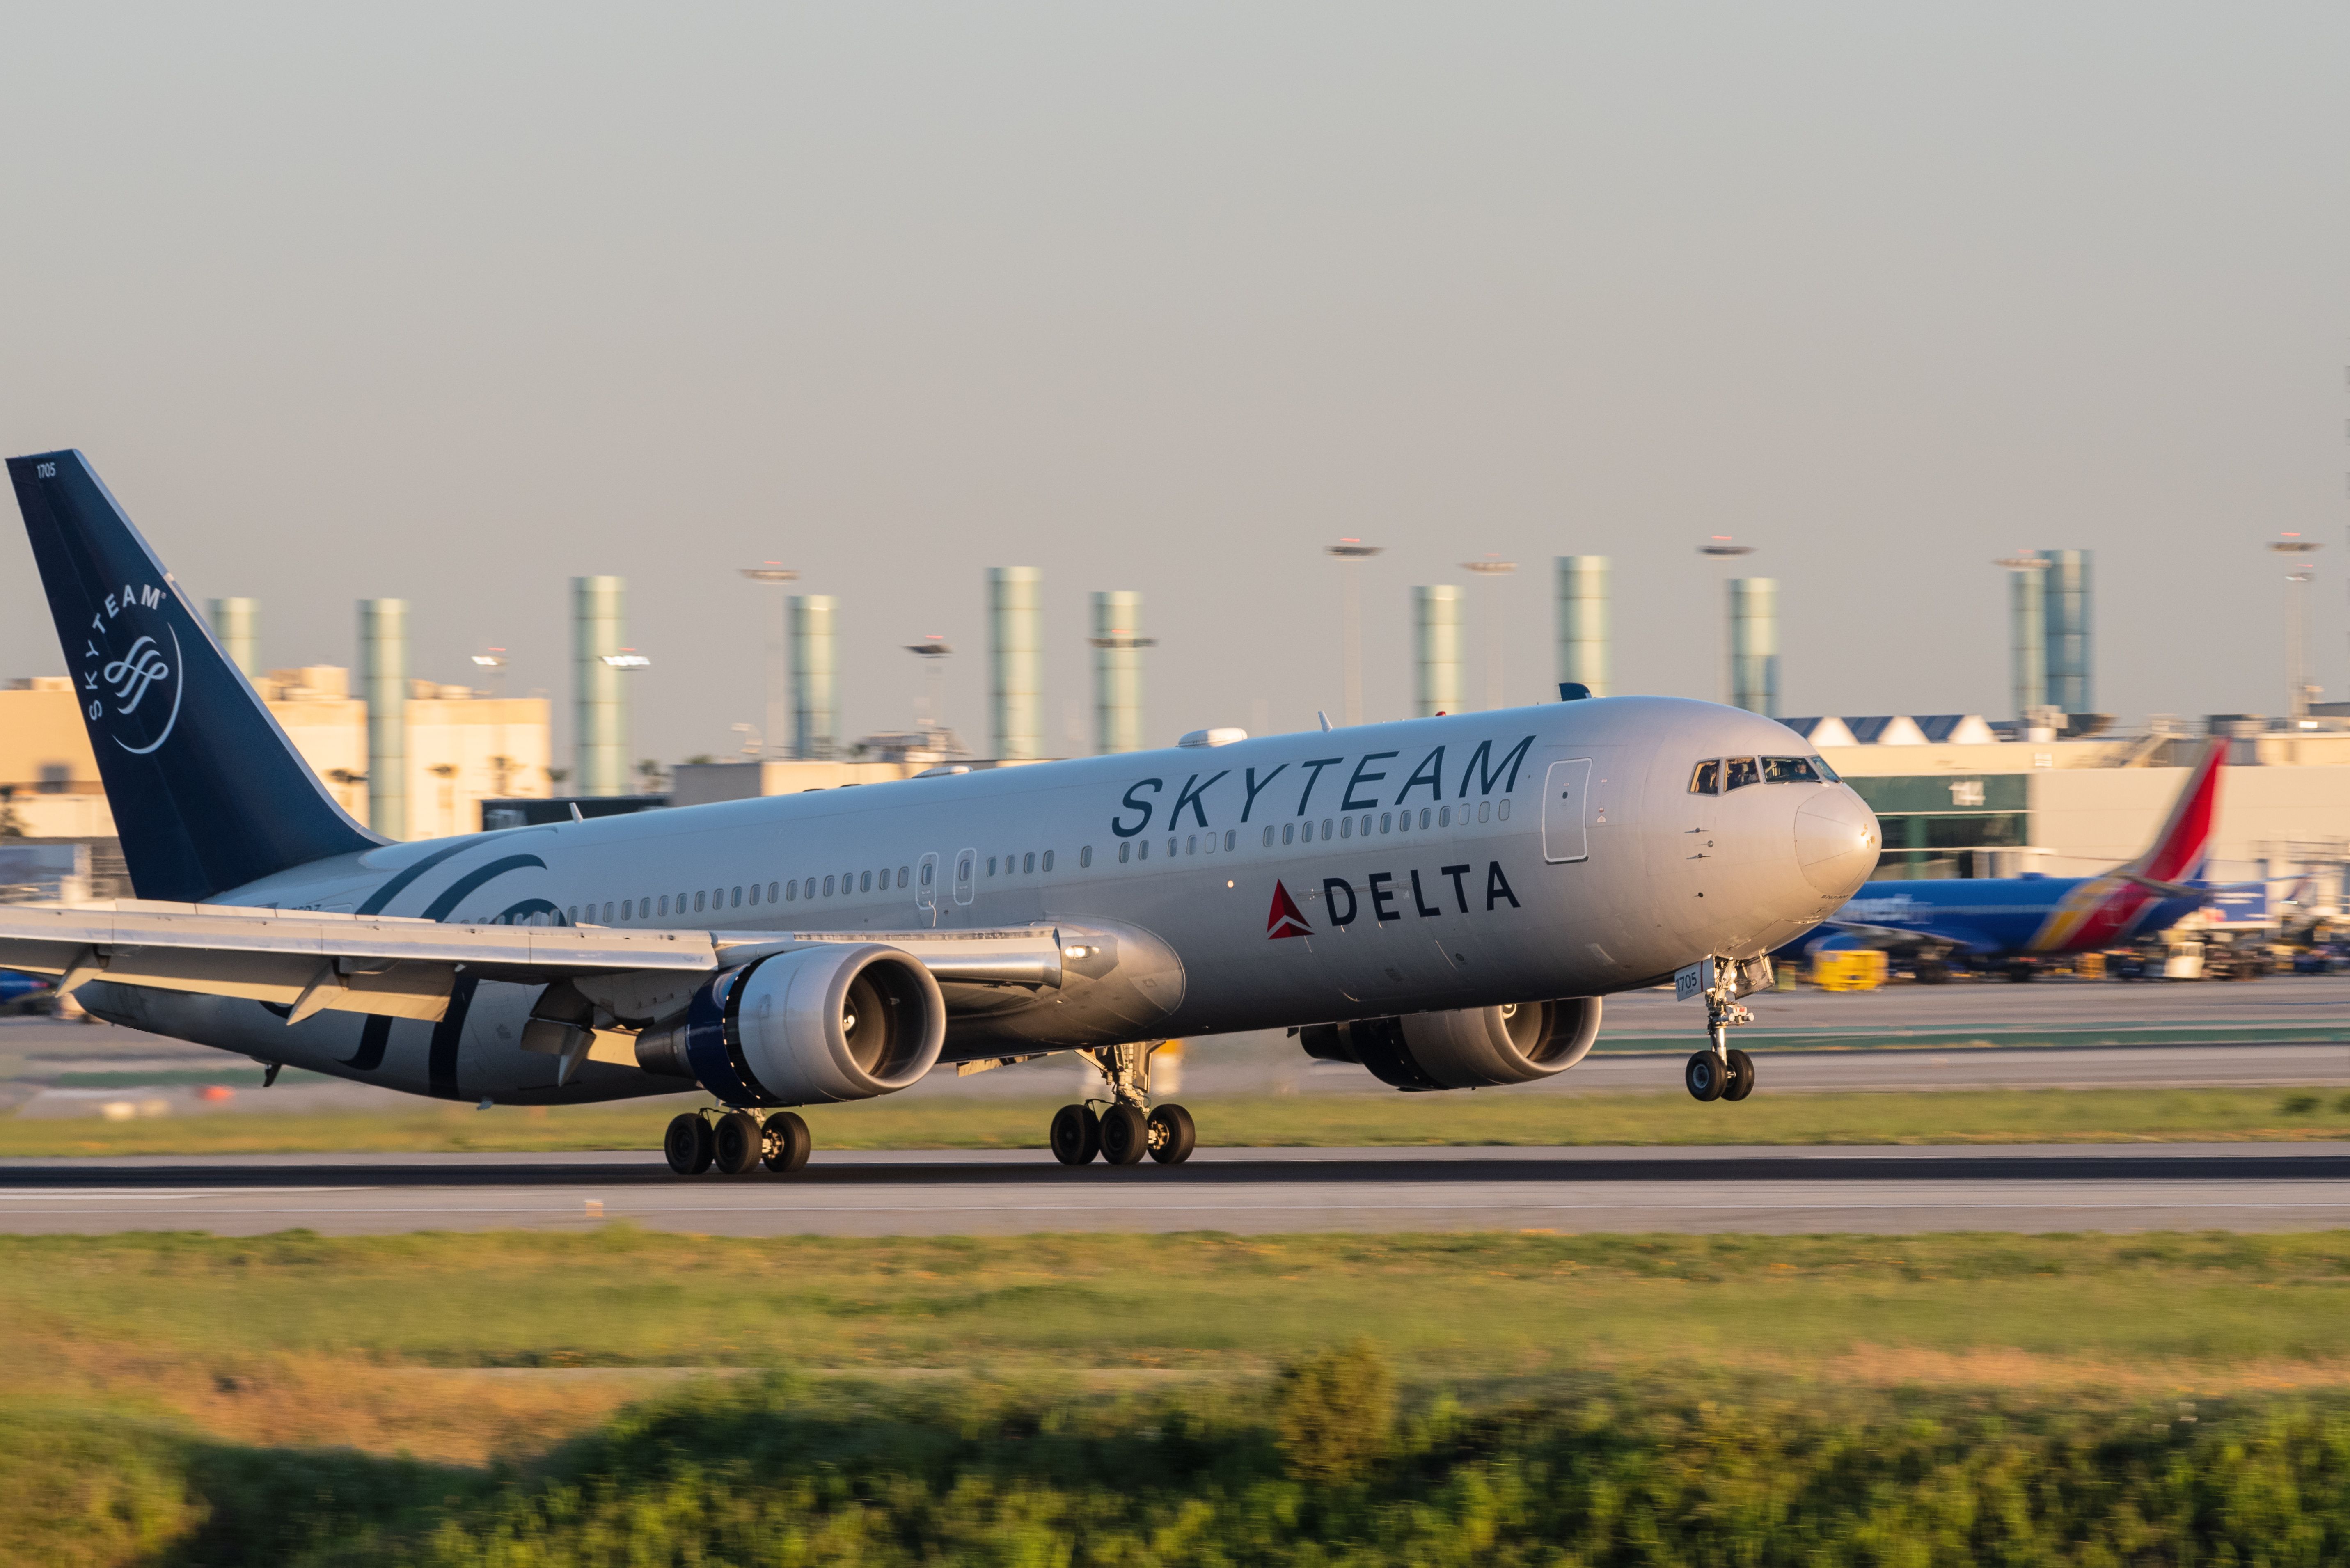 A Delta Air Lines Boeing 777 in the SkyTeam Alliance livery lands at Los Angeles International Airport, LAX.